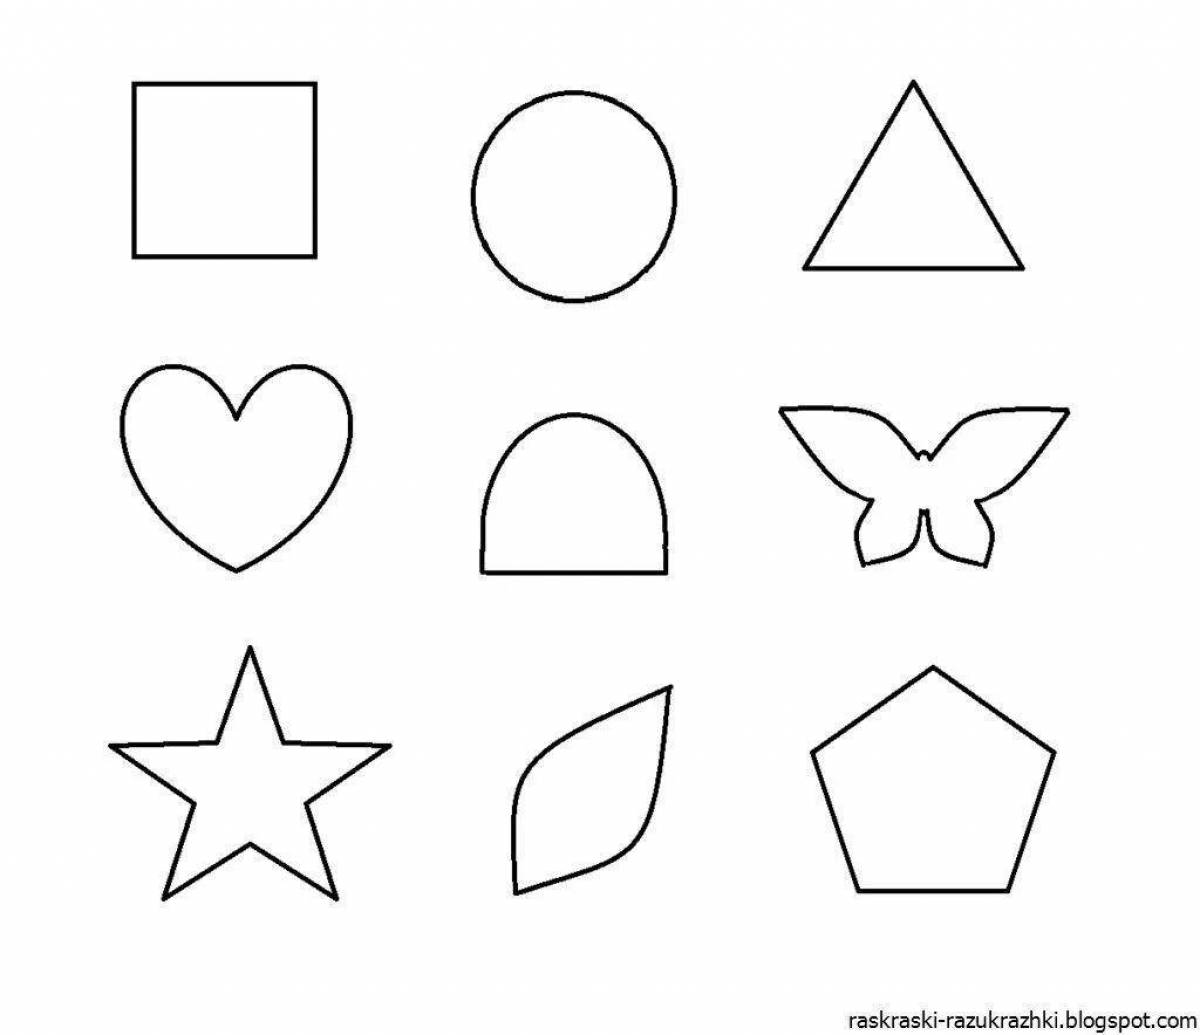 Coloring page of fascinating geometric shapes